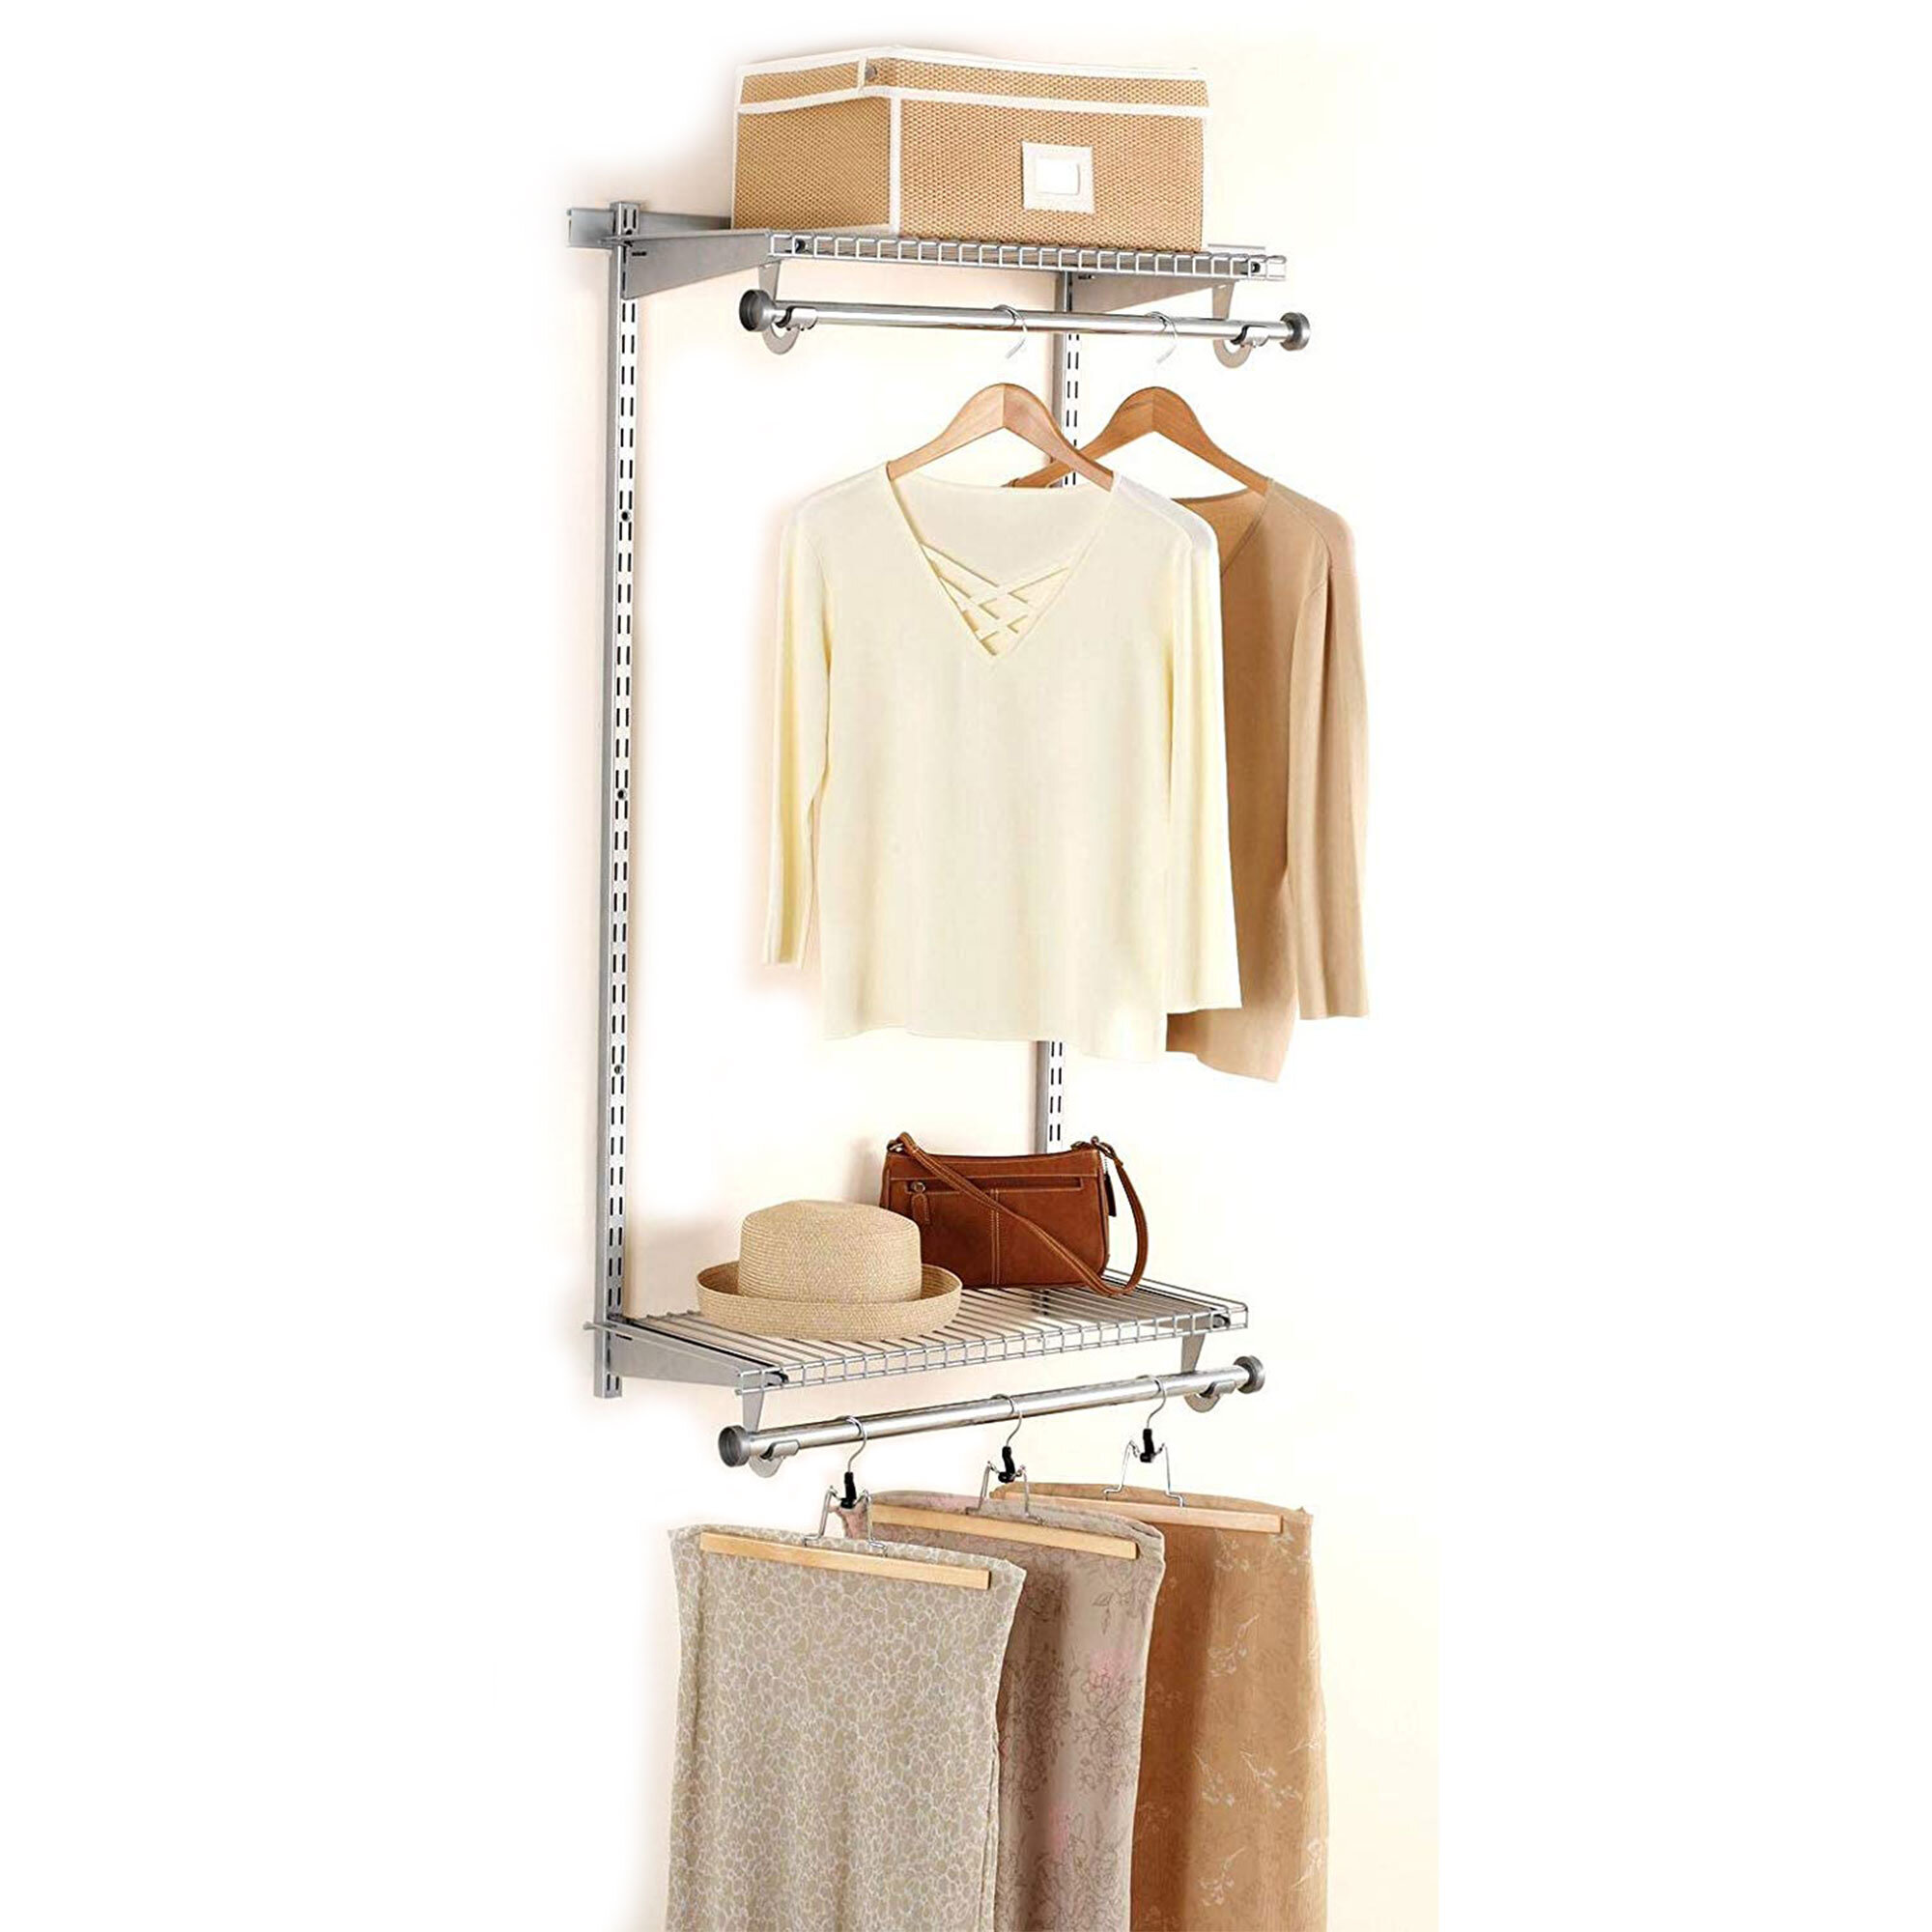 Configurations™ Closet Add-On Shelf with Hang Rod Kit